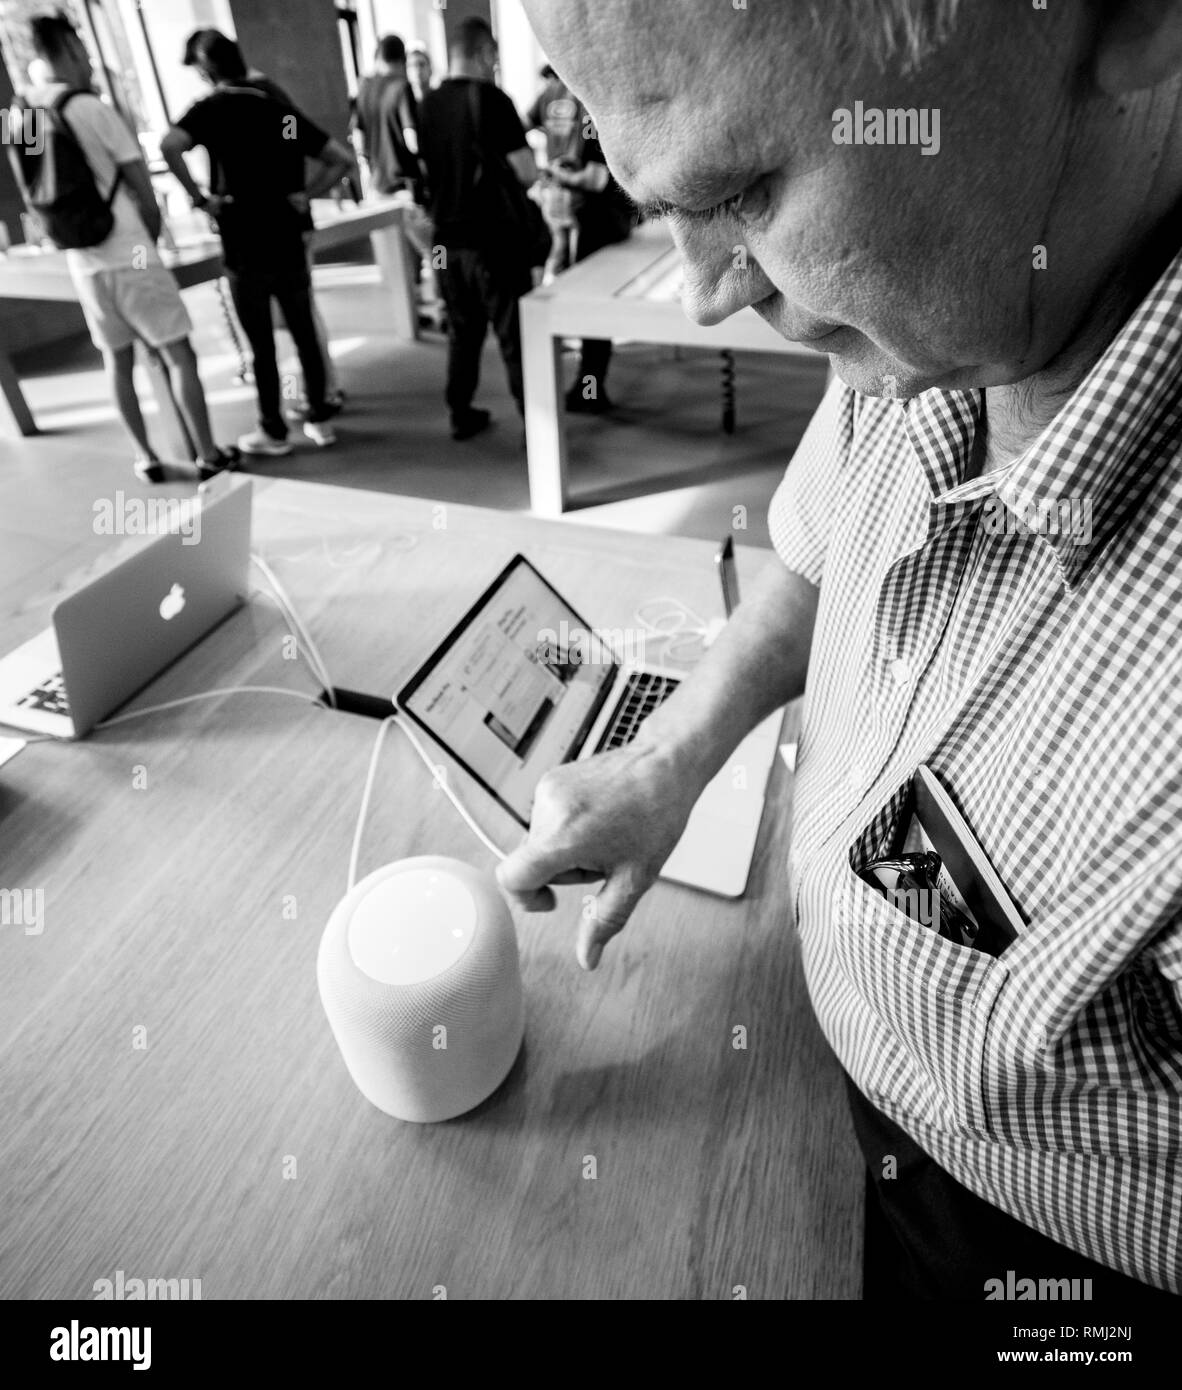 STRASBOURG, FRANCE - SEP 21, 2018: Curious senior man testing HomePod the smart speaker in Apple Store during the iPhone Xs and Xs Max preorder for Xr and Watch Series 4 wearable smartwatch - black and white Stock Photo